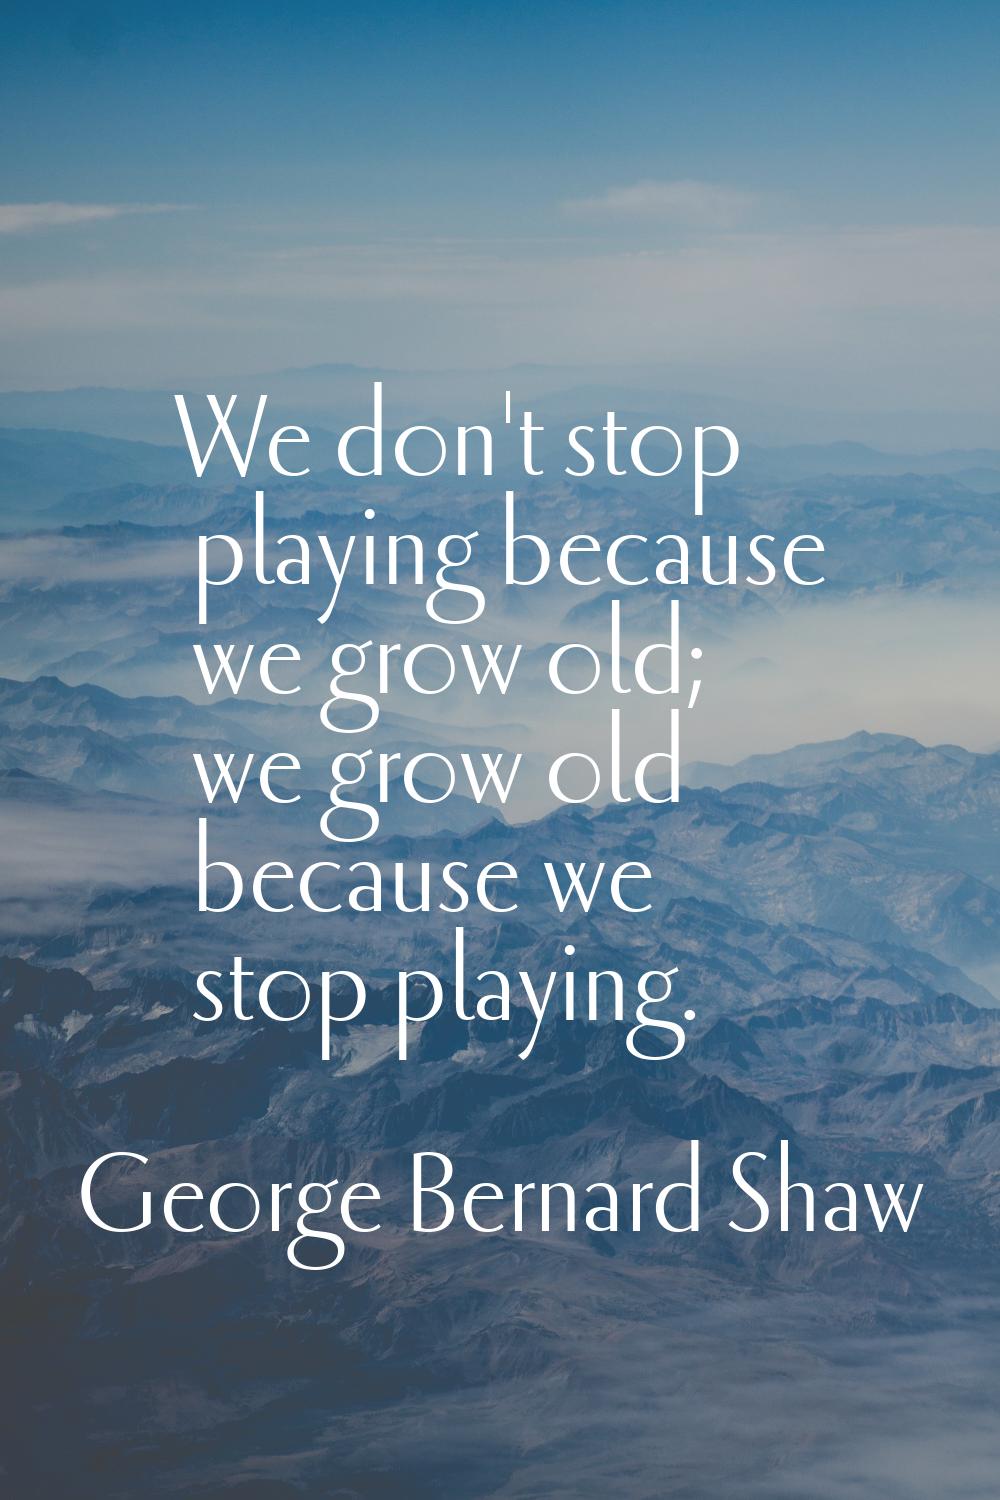 We don't stop playing because we grow old; we grow old because we stop playing.